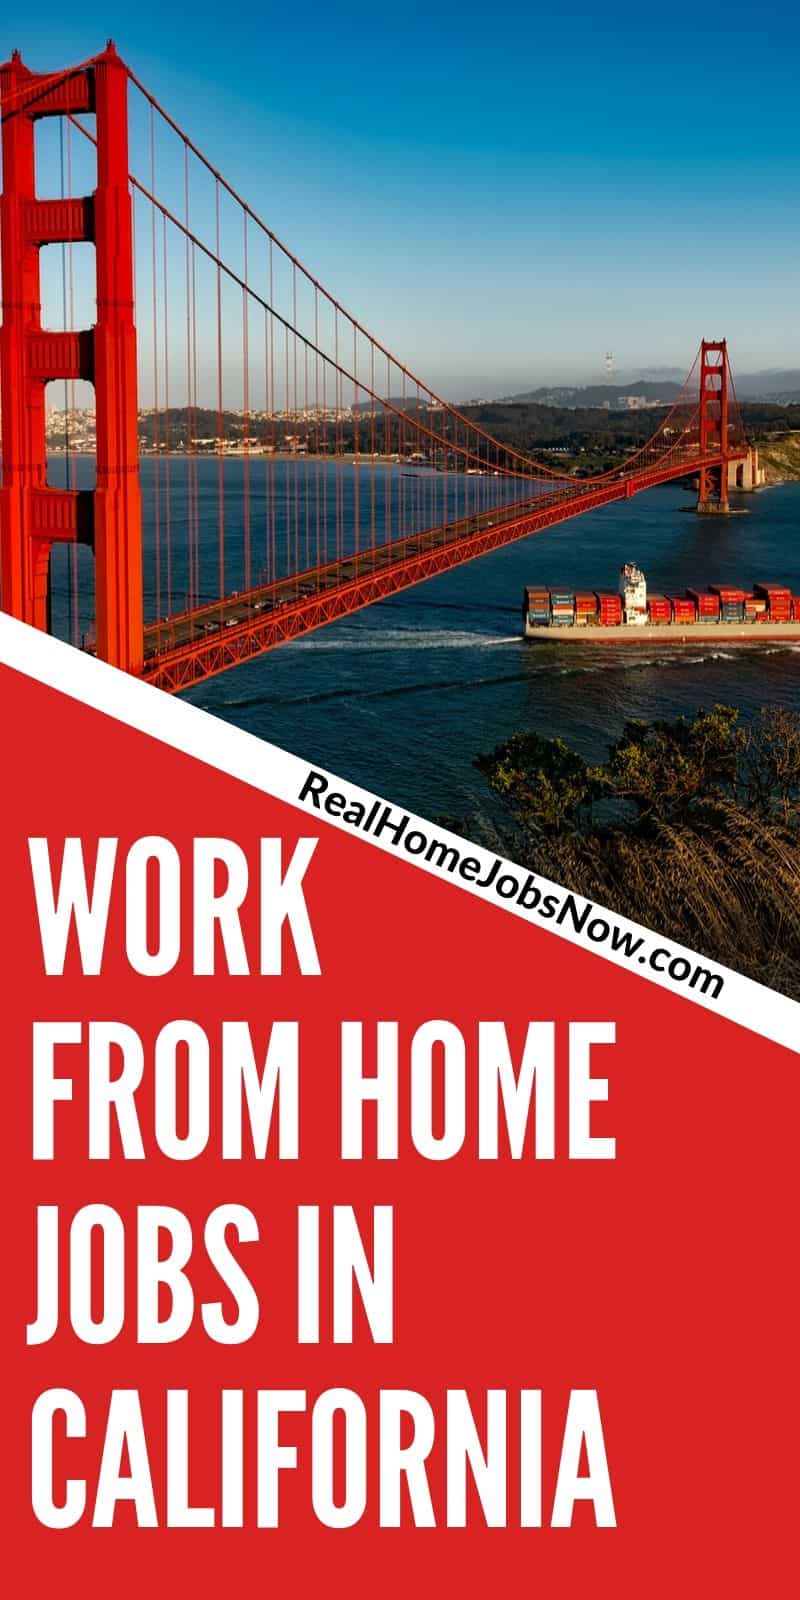 Have you been looking for legitimate work from home jobs in California? Look no further! Here's a big list of companies that hire Californians (and others) to work remotely.